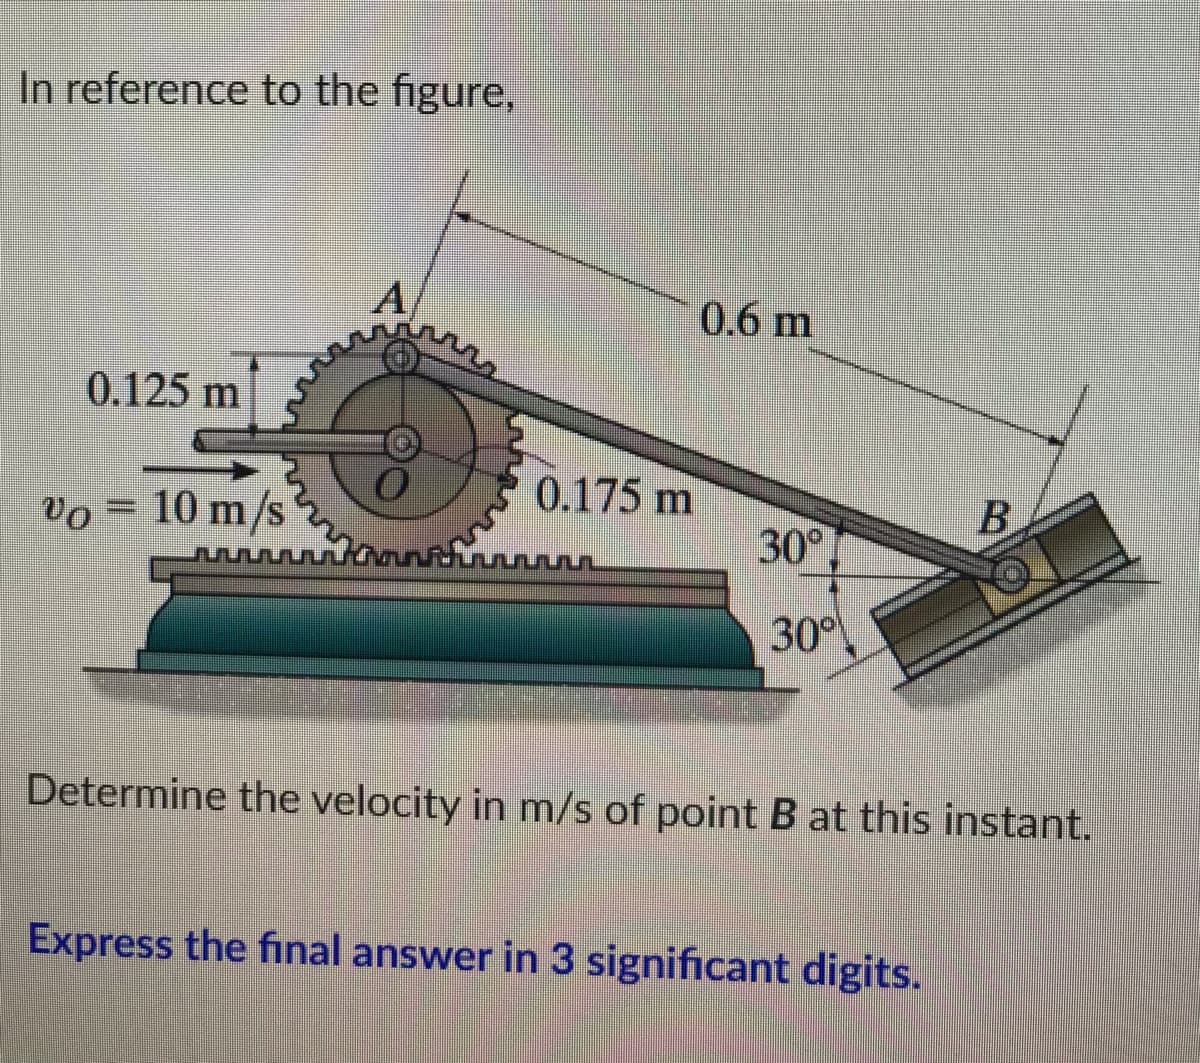 In reference to the figure,
A
0.125 m
0.175 m
B
% = 10 m/s
m/s
30°
Determine the velocity in m/s of point B at this instant.
Express the final answer in 3 significant digits.
0.6 m
30°